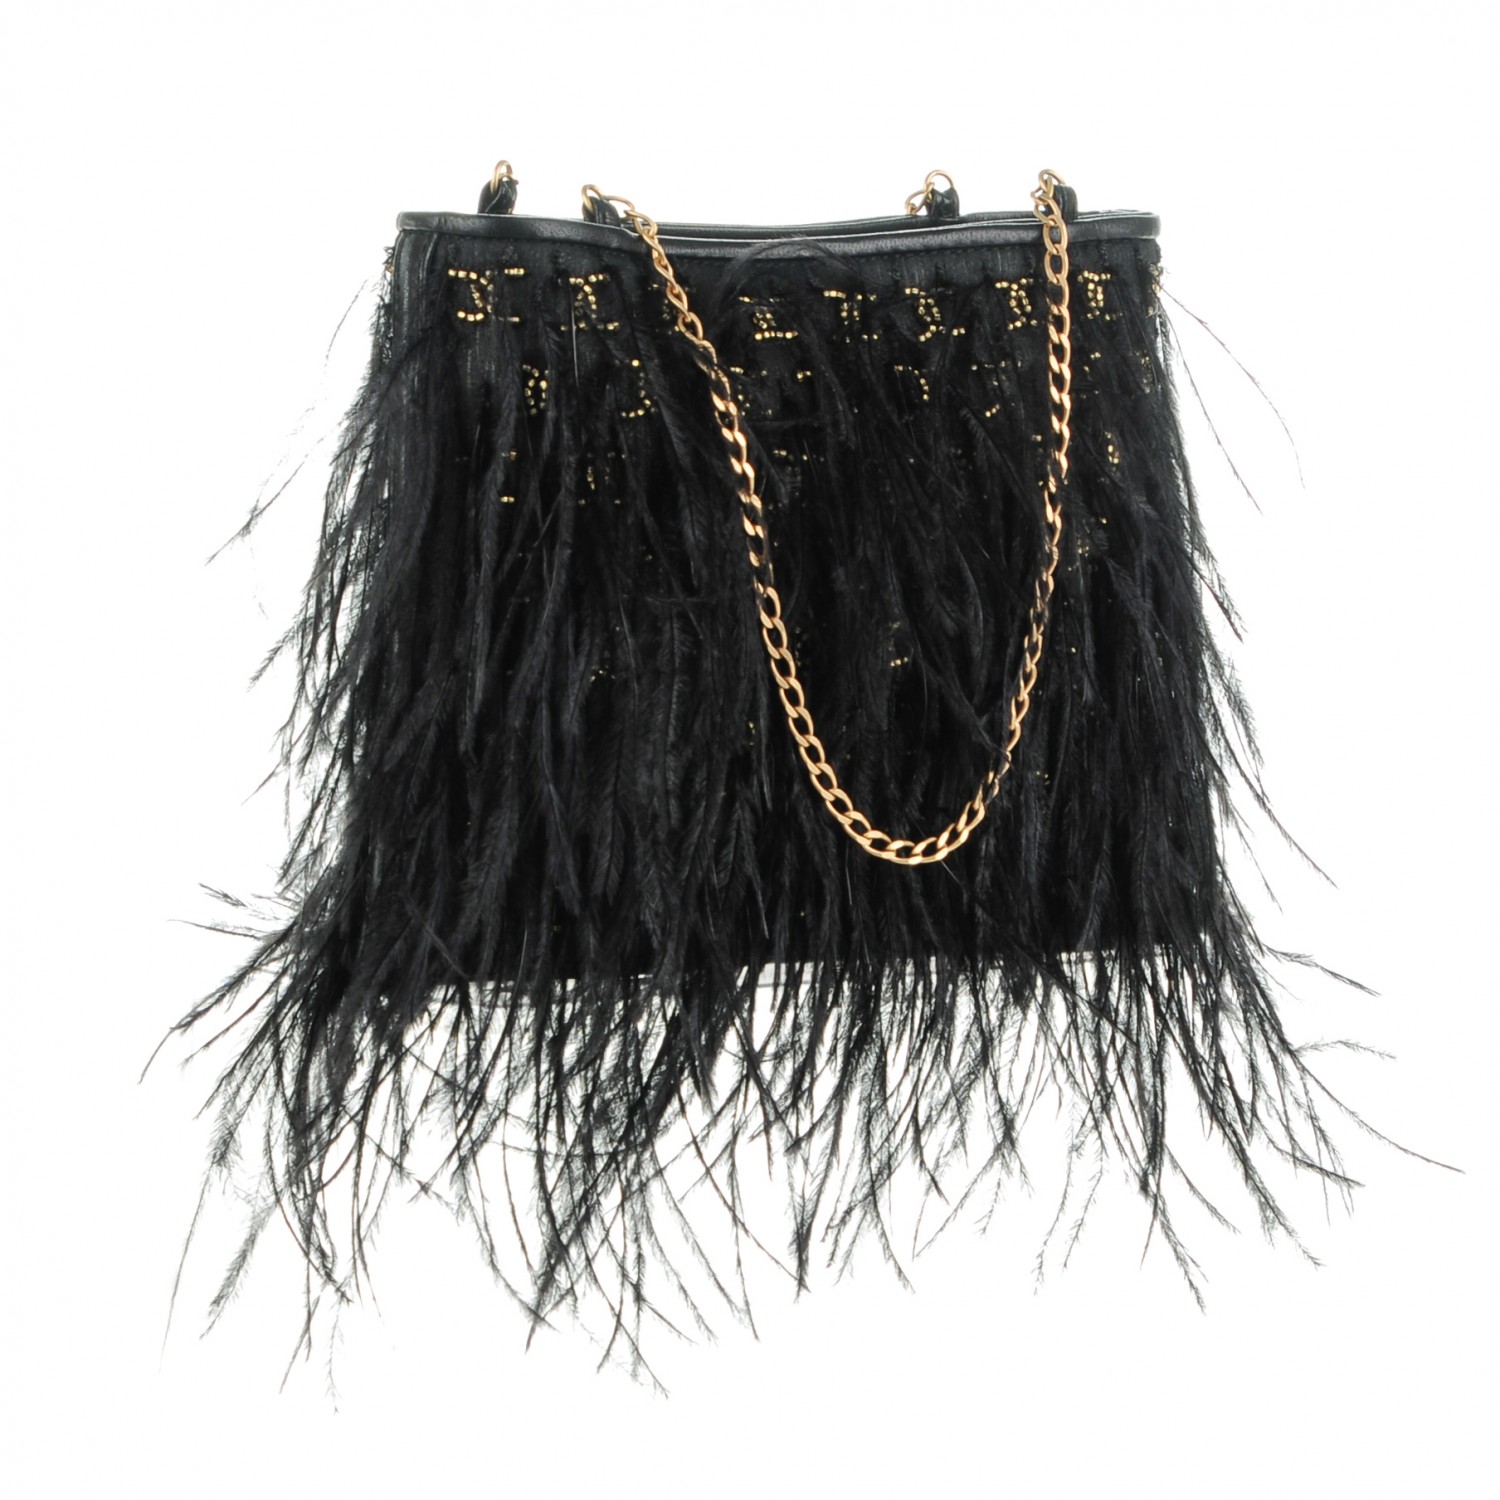 CHANEL Ostrich Feather Beaded CC Evening Bag Black 154840